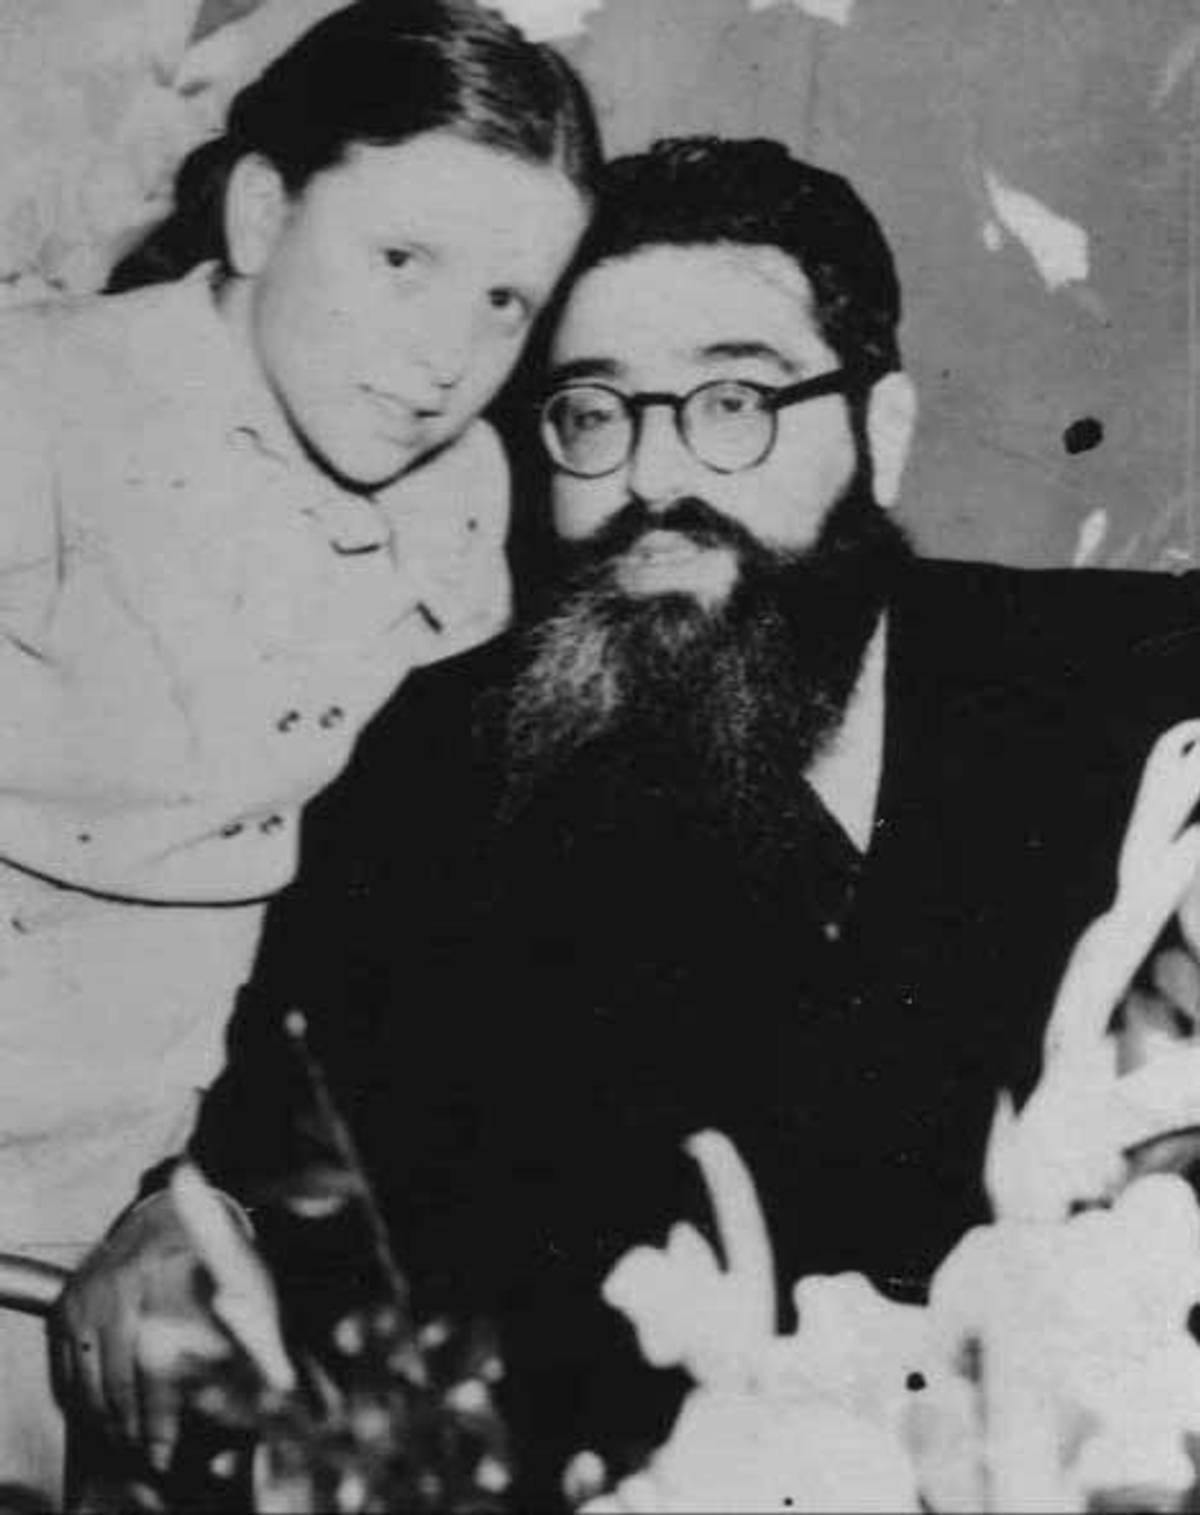 Bruria Hutner David as a child, pictured with her father, Rabbi Yitzchak Hutner, circa 1950